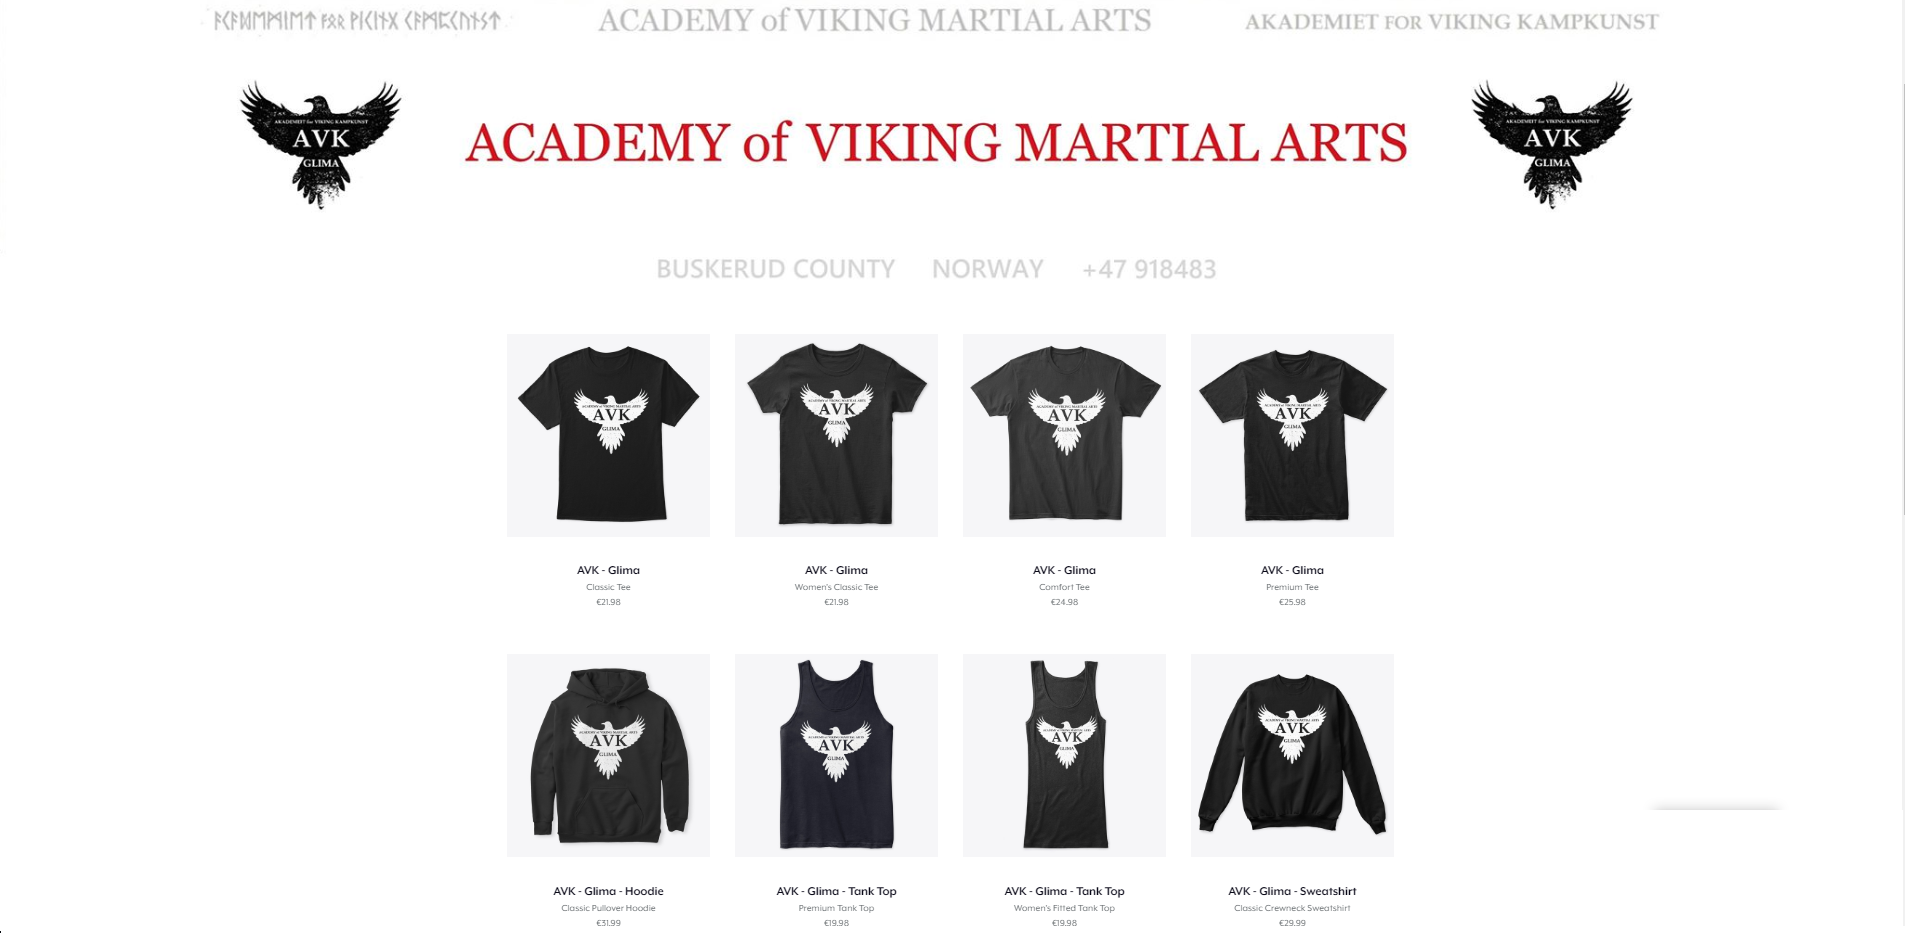 STICK FIGHTING by Tyr Neilsen — ACADEMY of VIKING MARTIAL ARTS